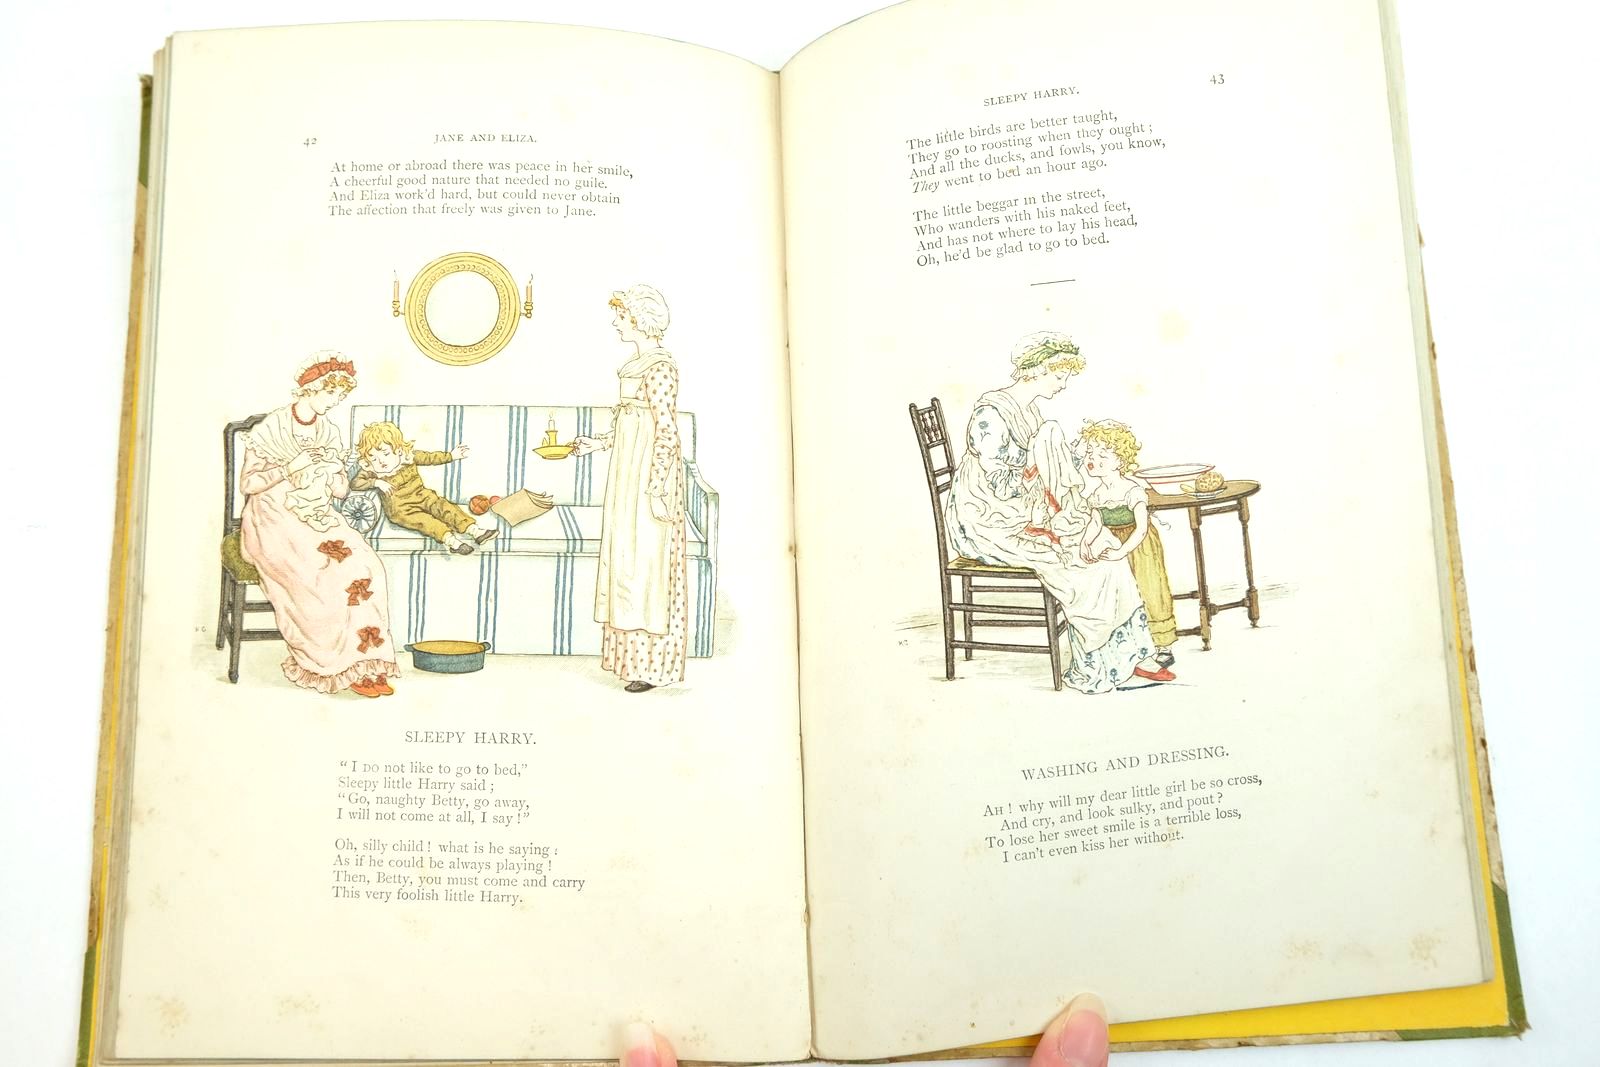 Photo of LITTLE ANN AND OTHER POEMS written by Taylor, Jane
Taylor, Ann illustrated by Greenaway, Kate published by Frederick Warne & Co. (STOCK CODE: 2134709)  for sale by Stella & Rose's Books